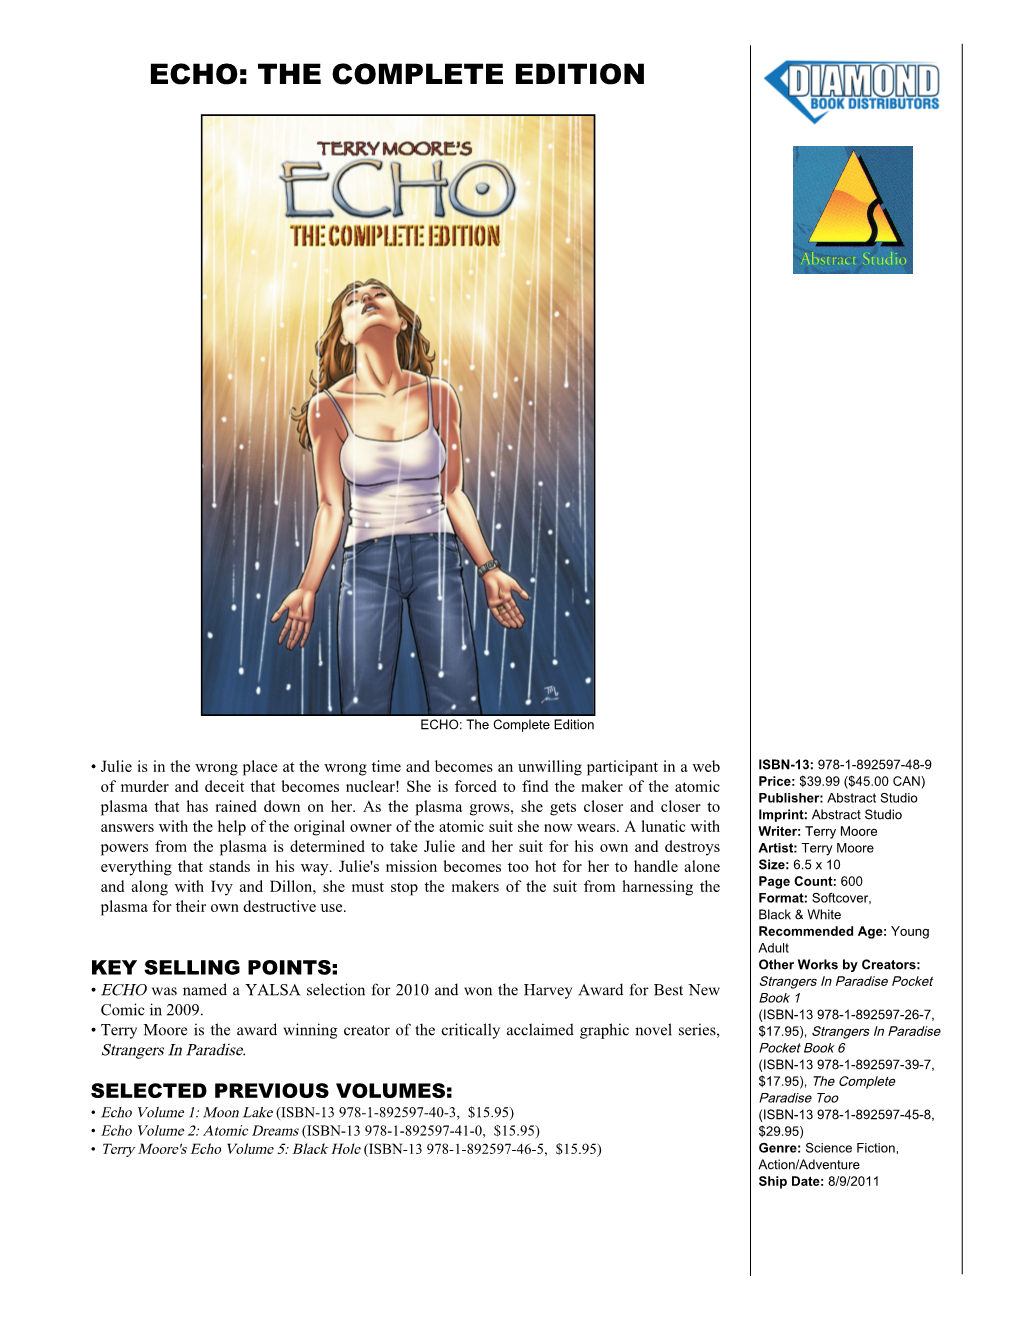 Echo: the Complete Edition